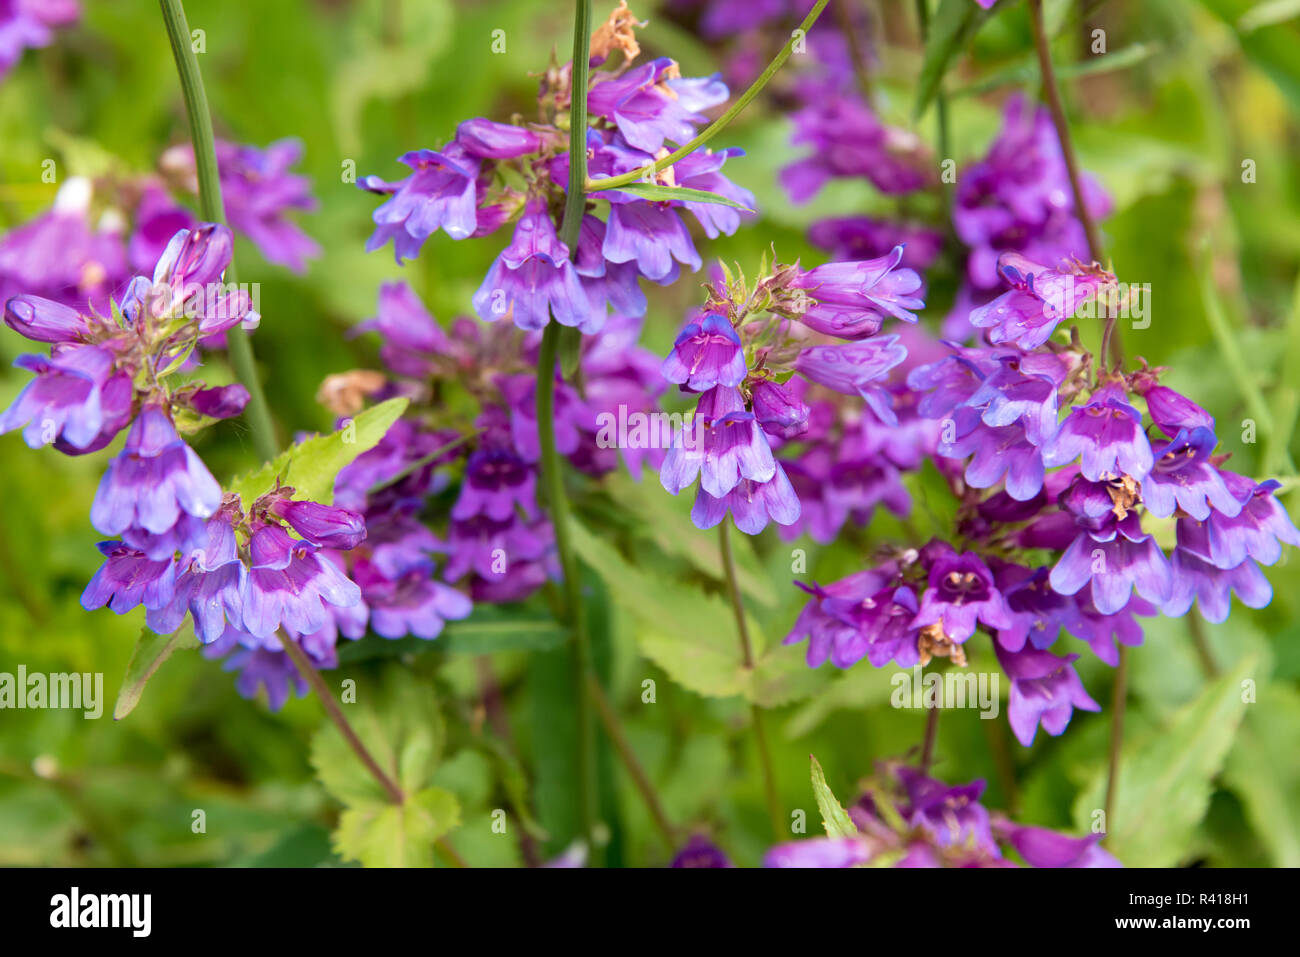 USA, Washington State, Olympic National Forest. Penstemon showy flowers on Mt. Townsend trail Stock Photo